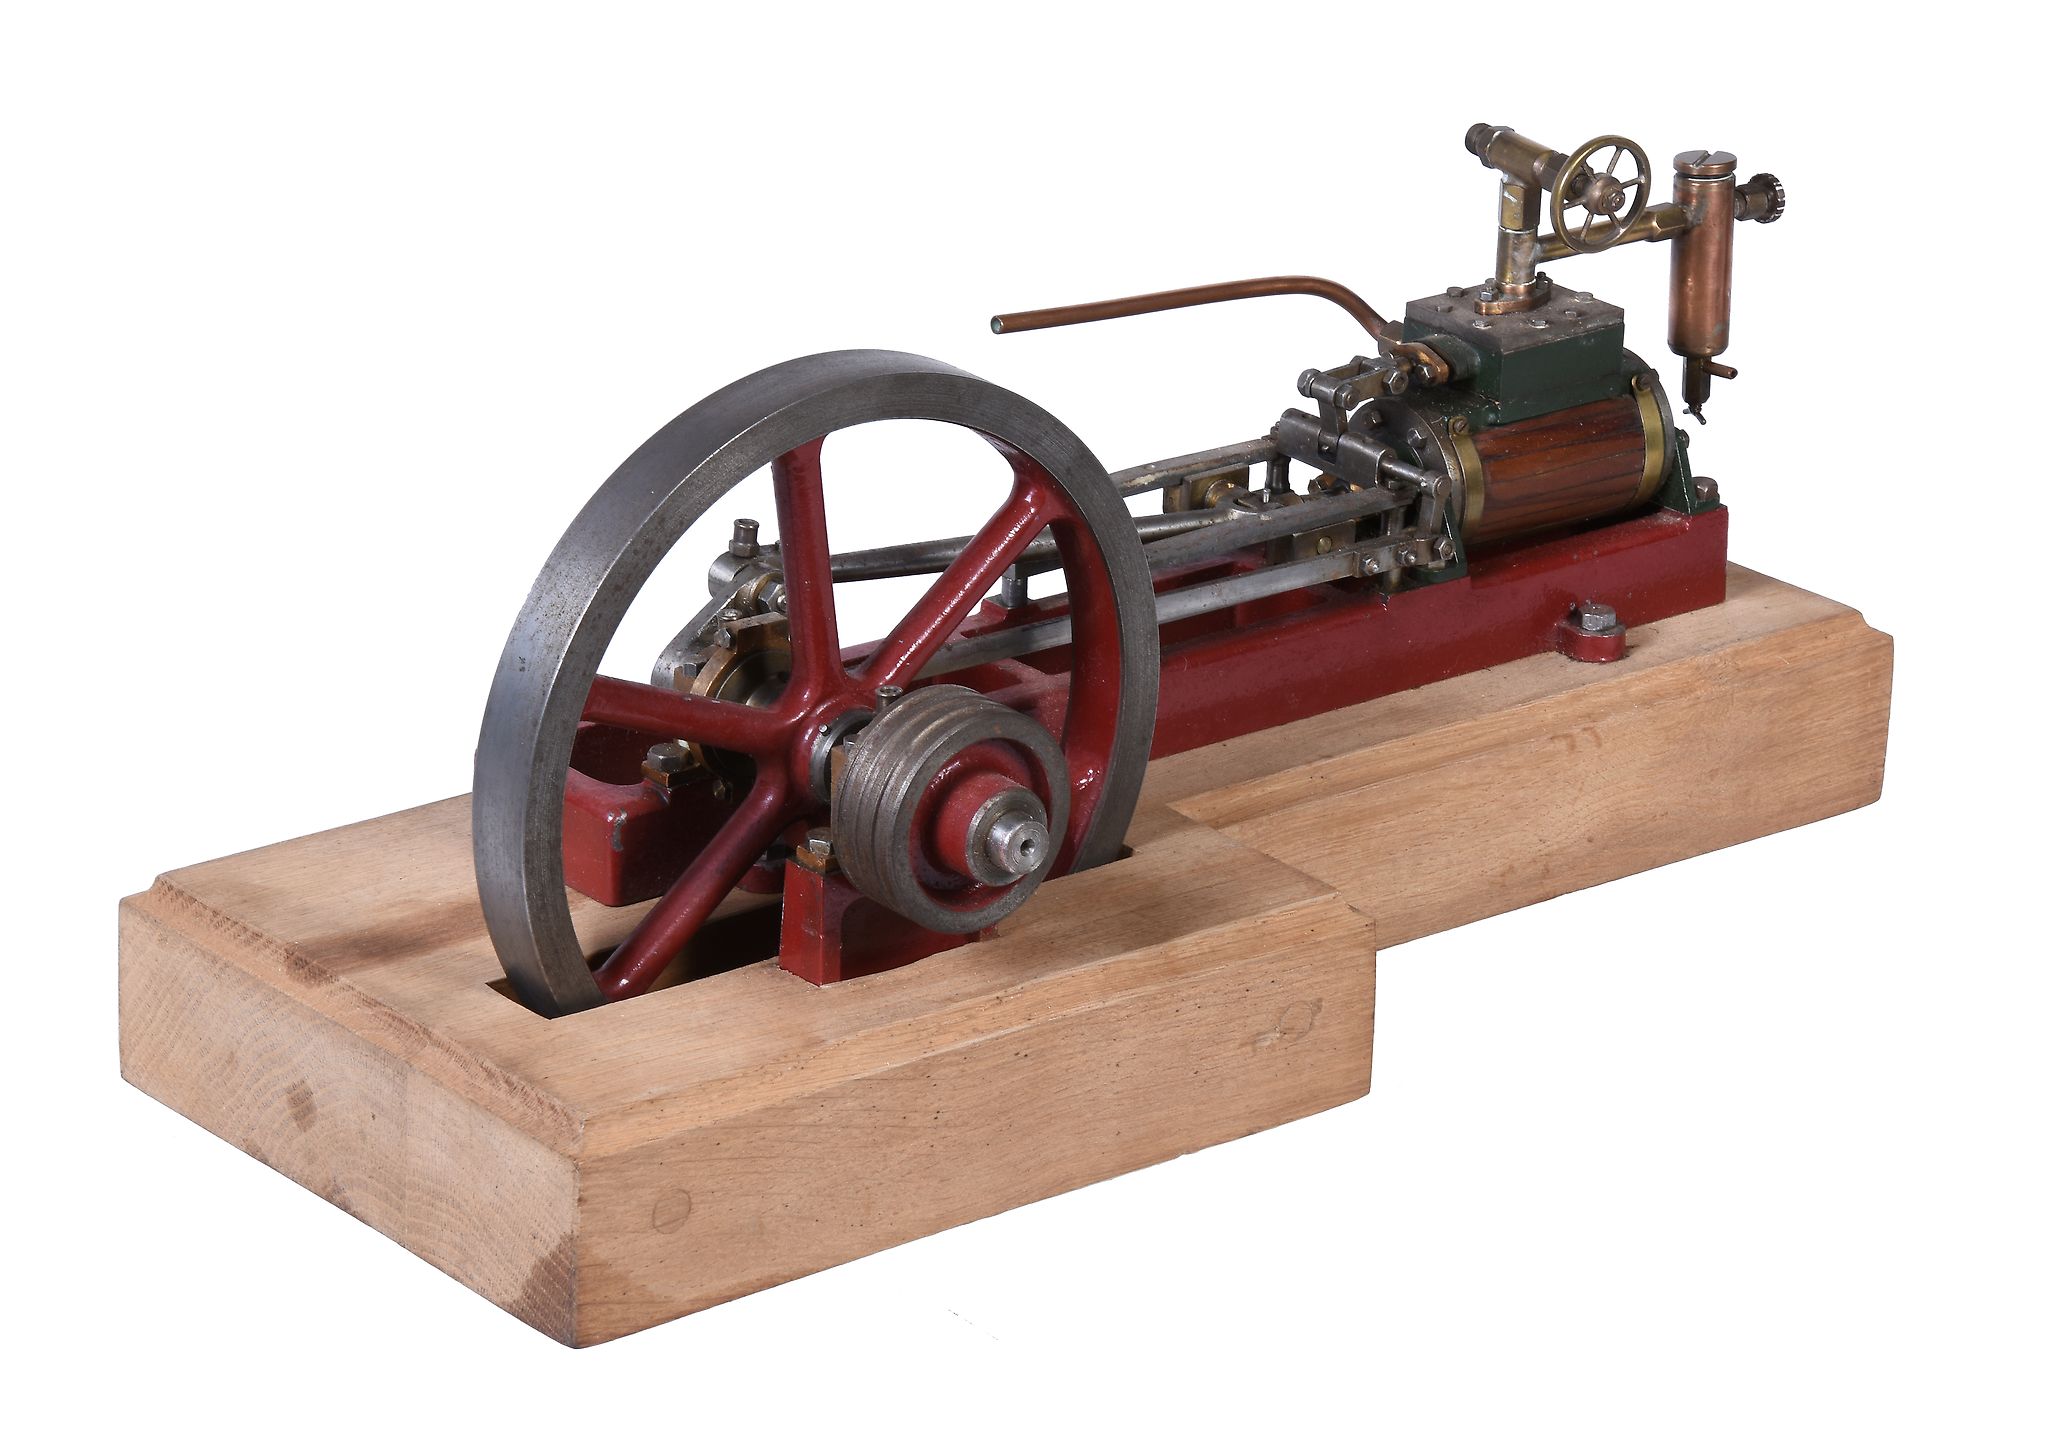 A well engineered model of a Stuart Turner live steam single Victoria horizontal mill engine, the